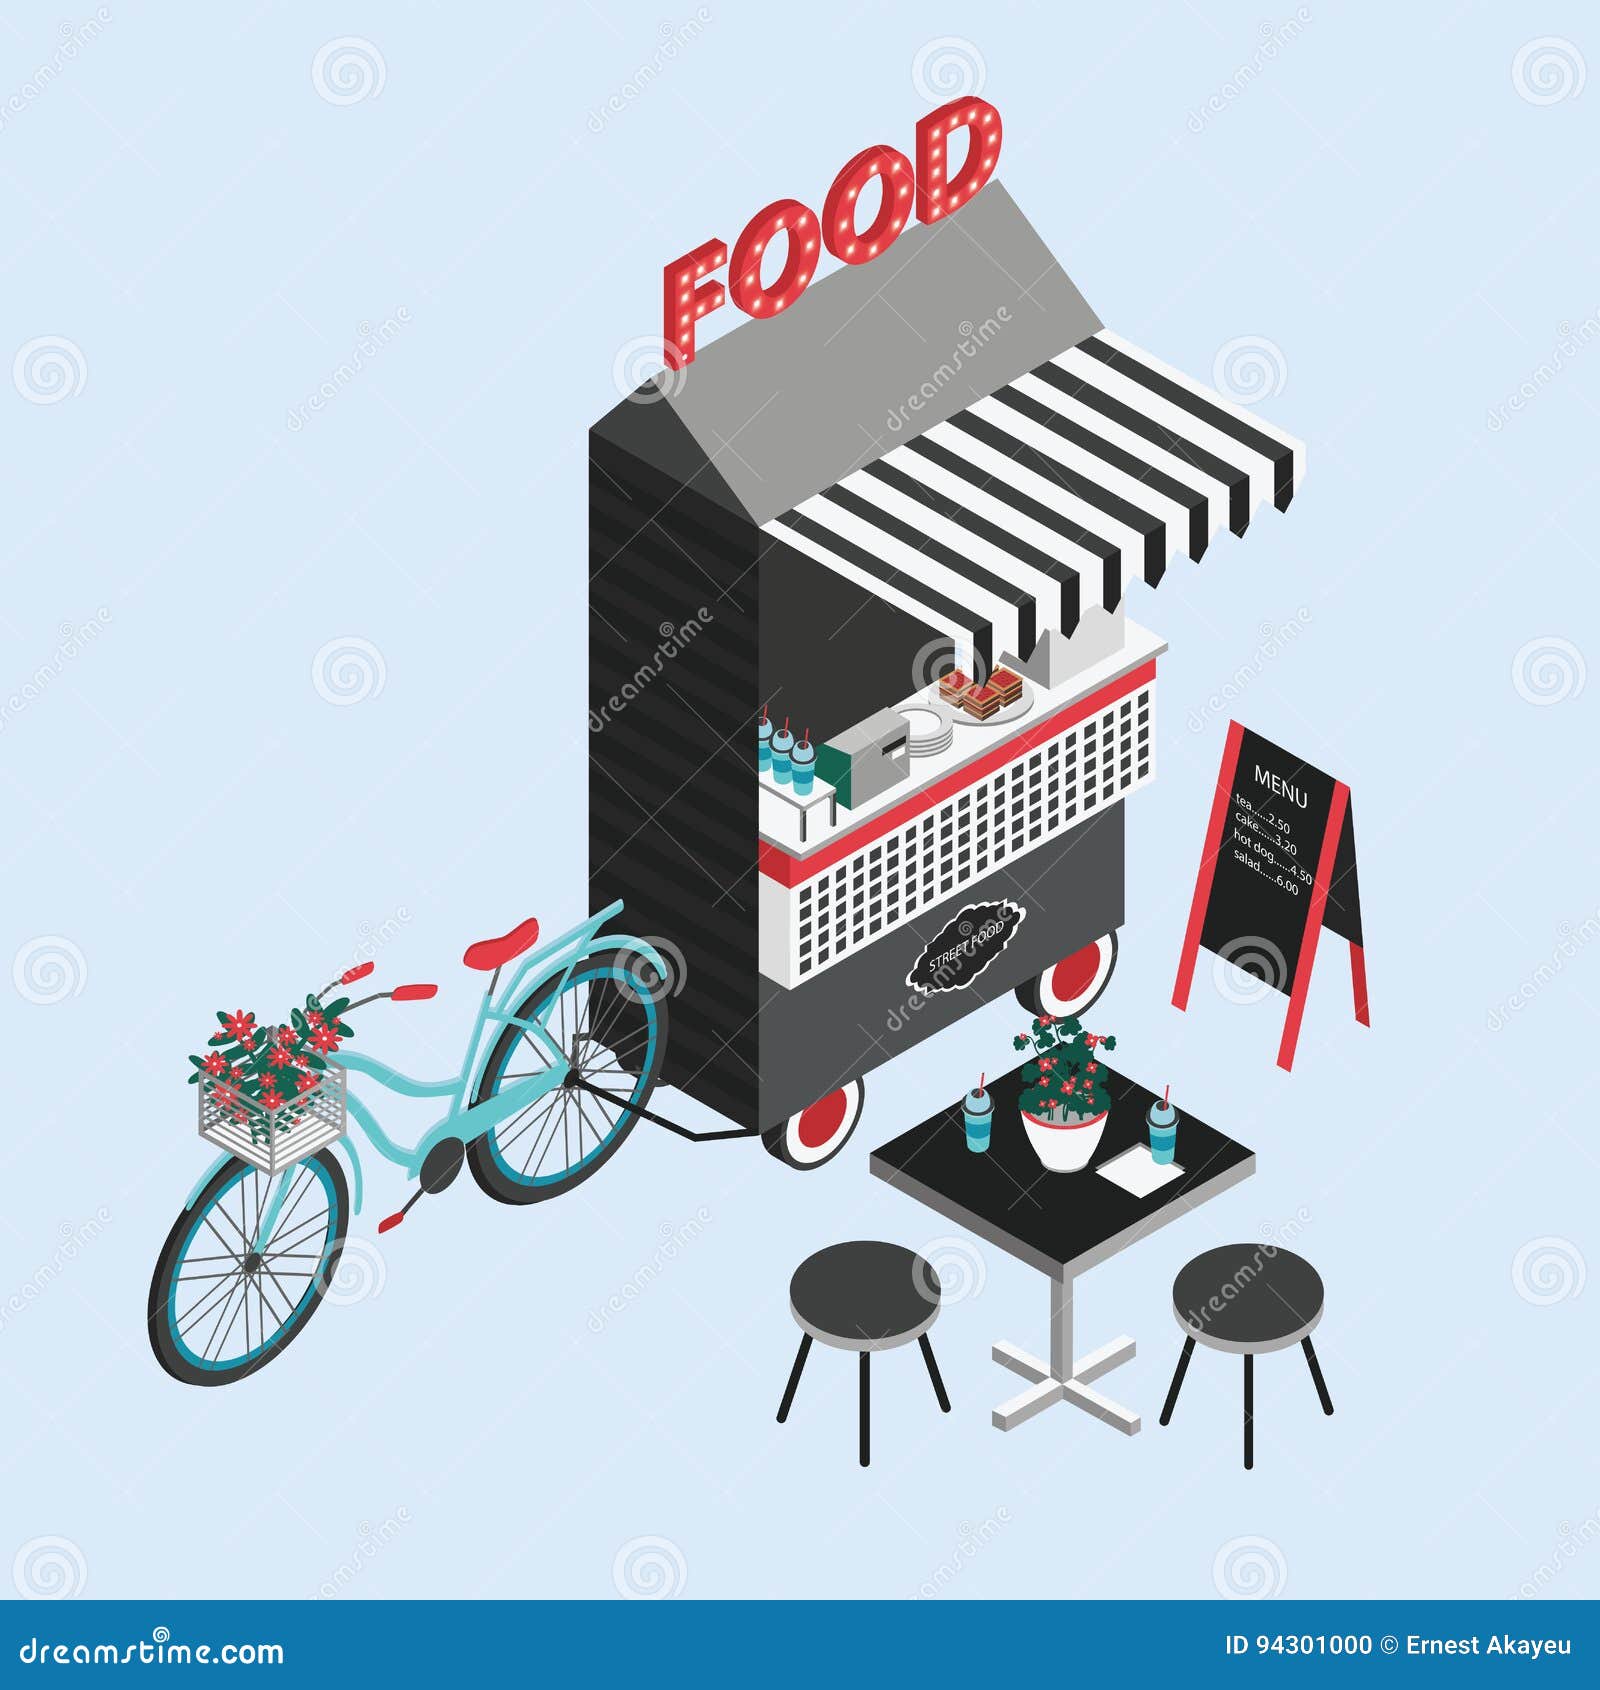 concept of street food. bicycle kiosk, foodtruck, portable cafe on wheels. isometric  with fastfood point of